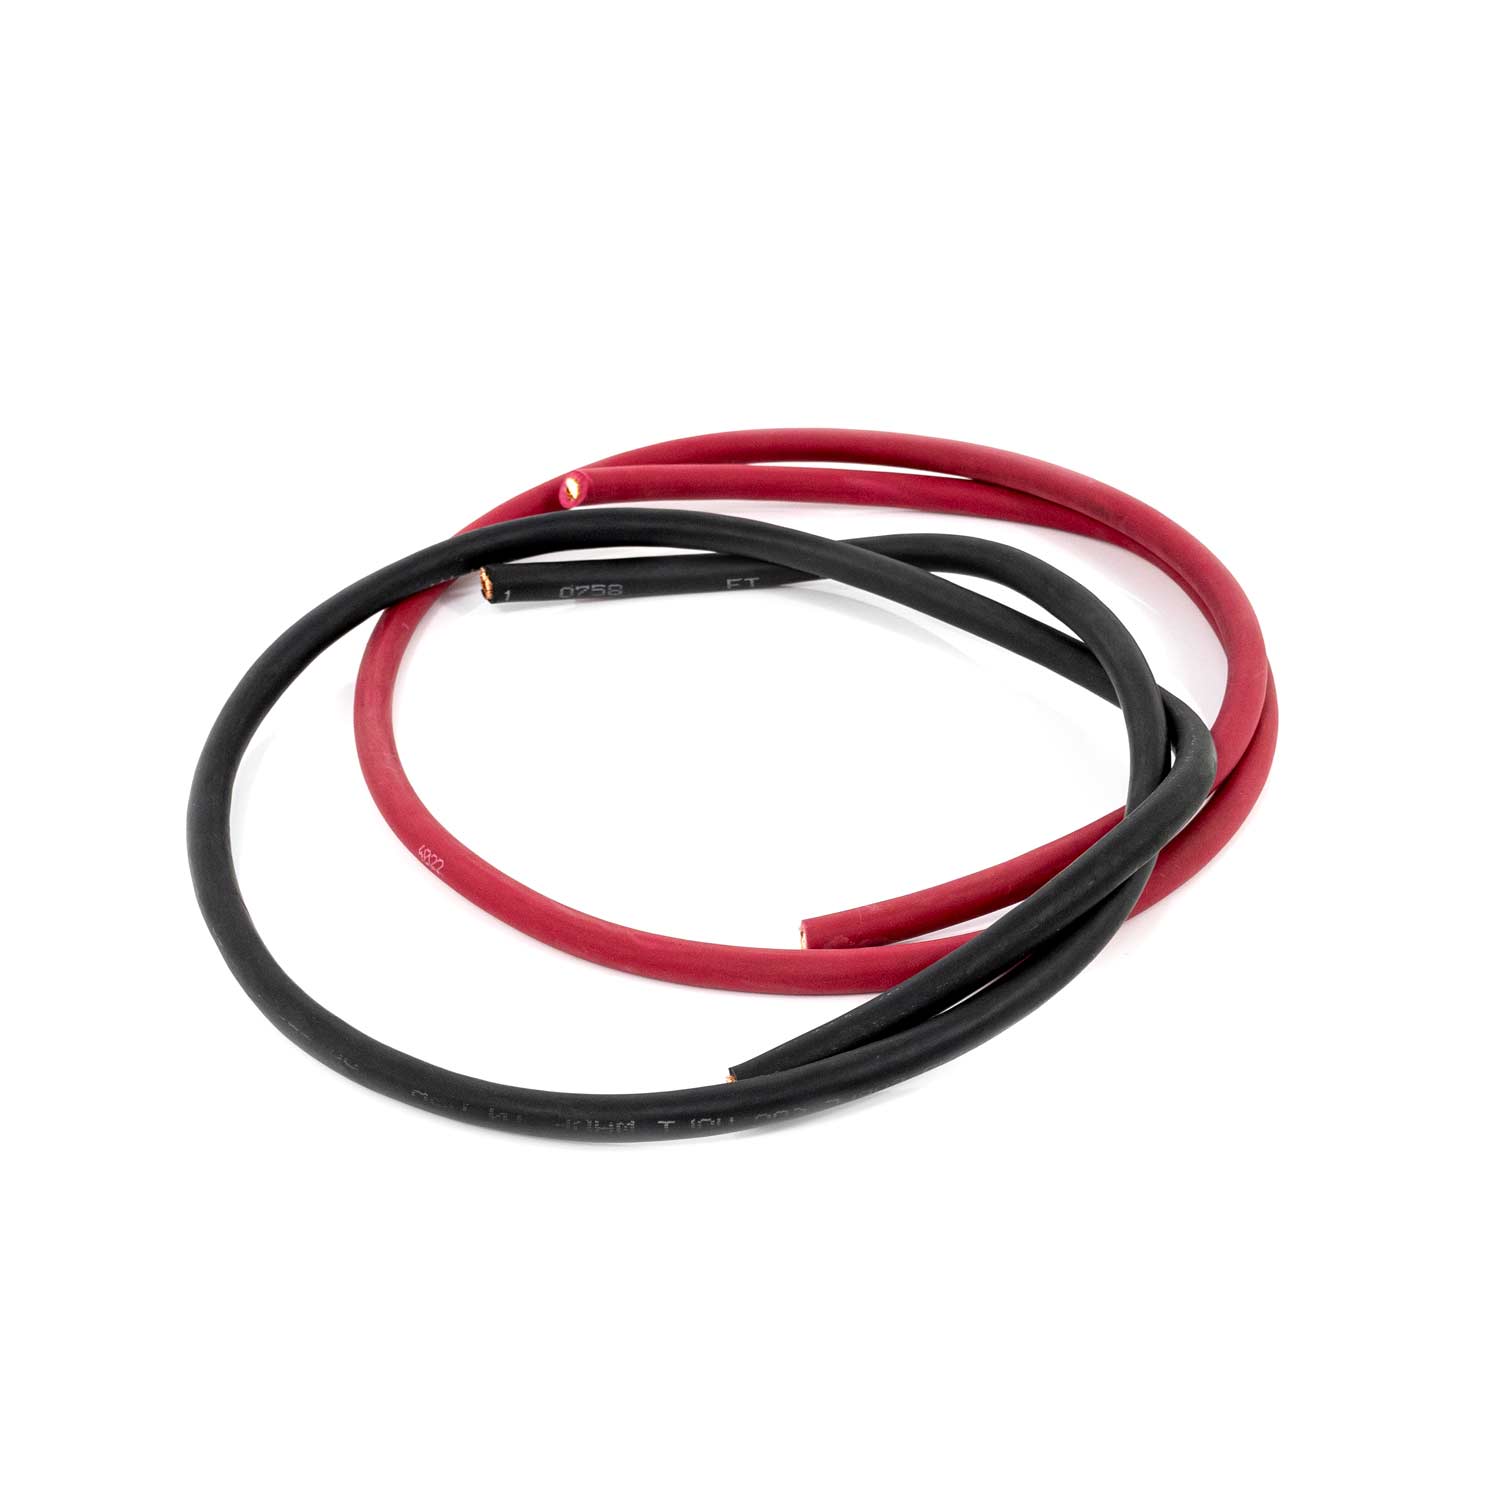 Two Pre-cut 6AWG Wires Red and Black